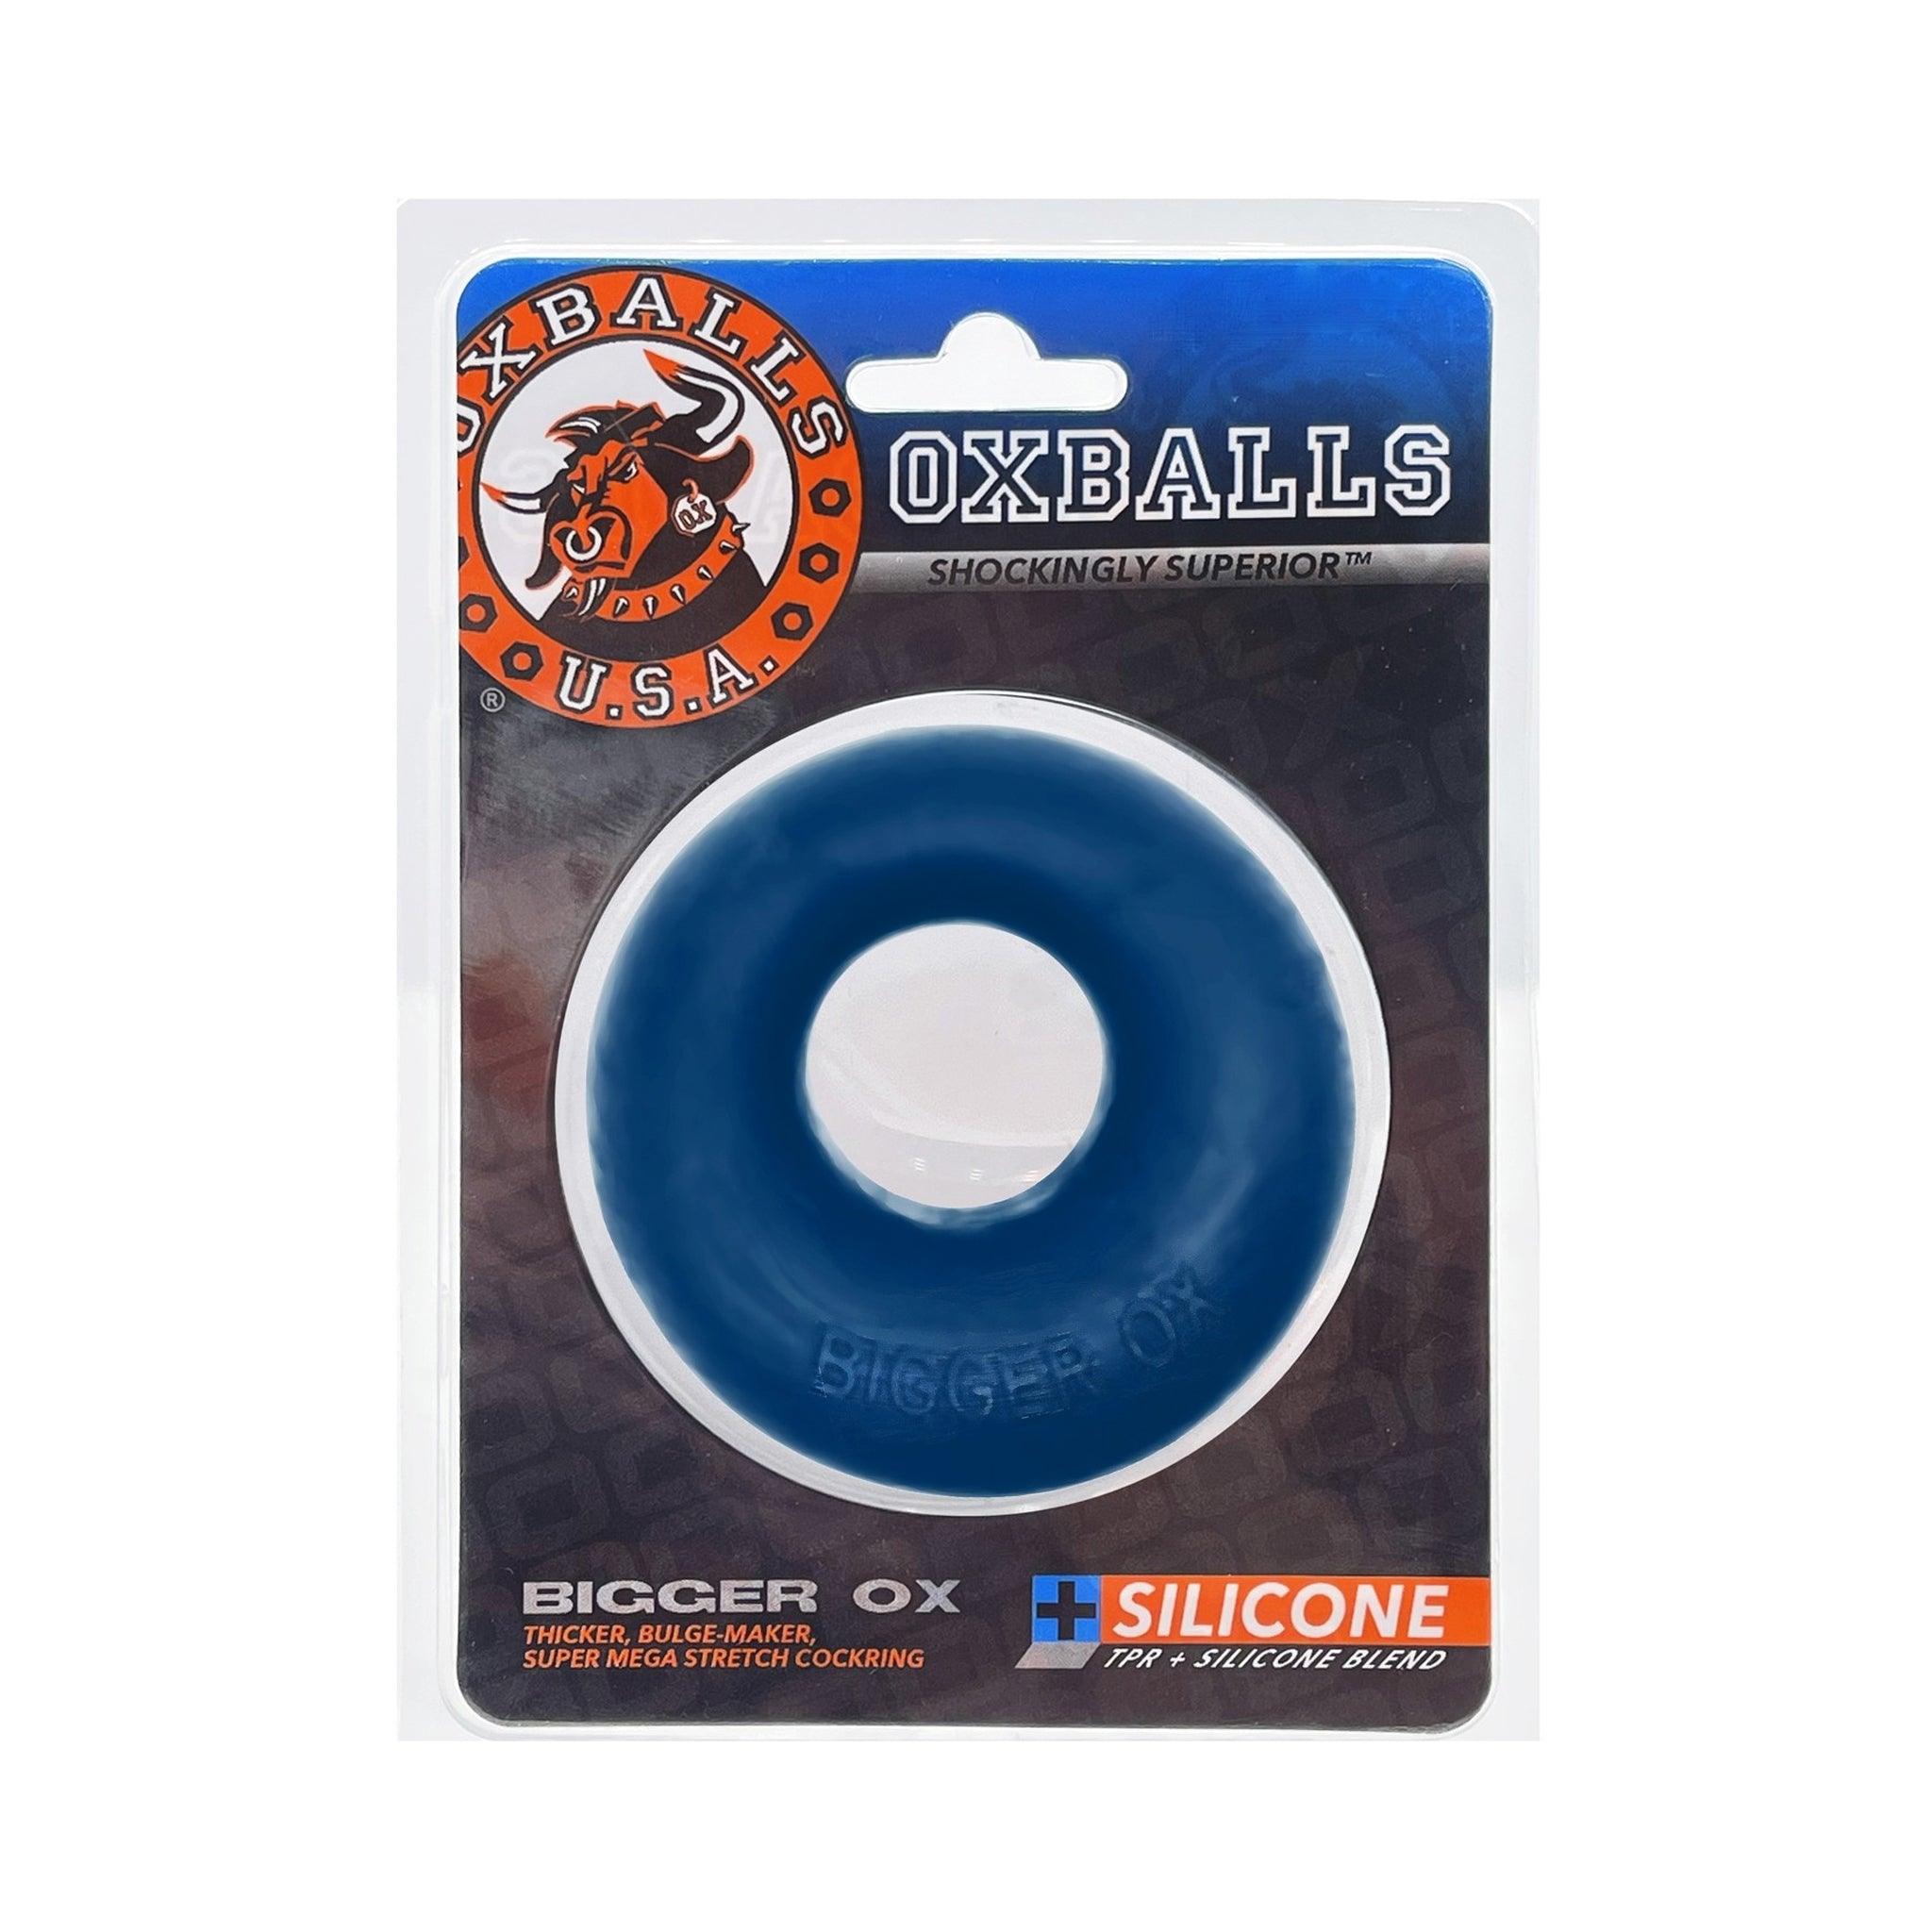 OxBalls Bigger OX Super Mega Stretch Ring - 2 Colors to Choose From - CheapLubes.com